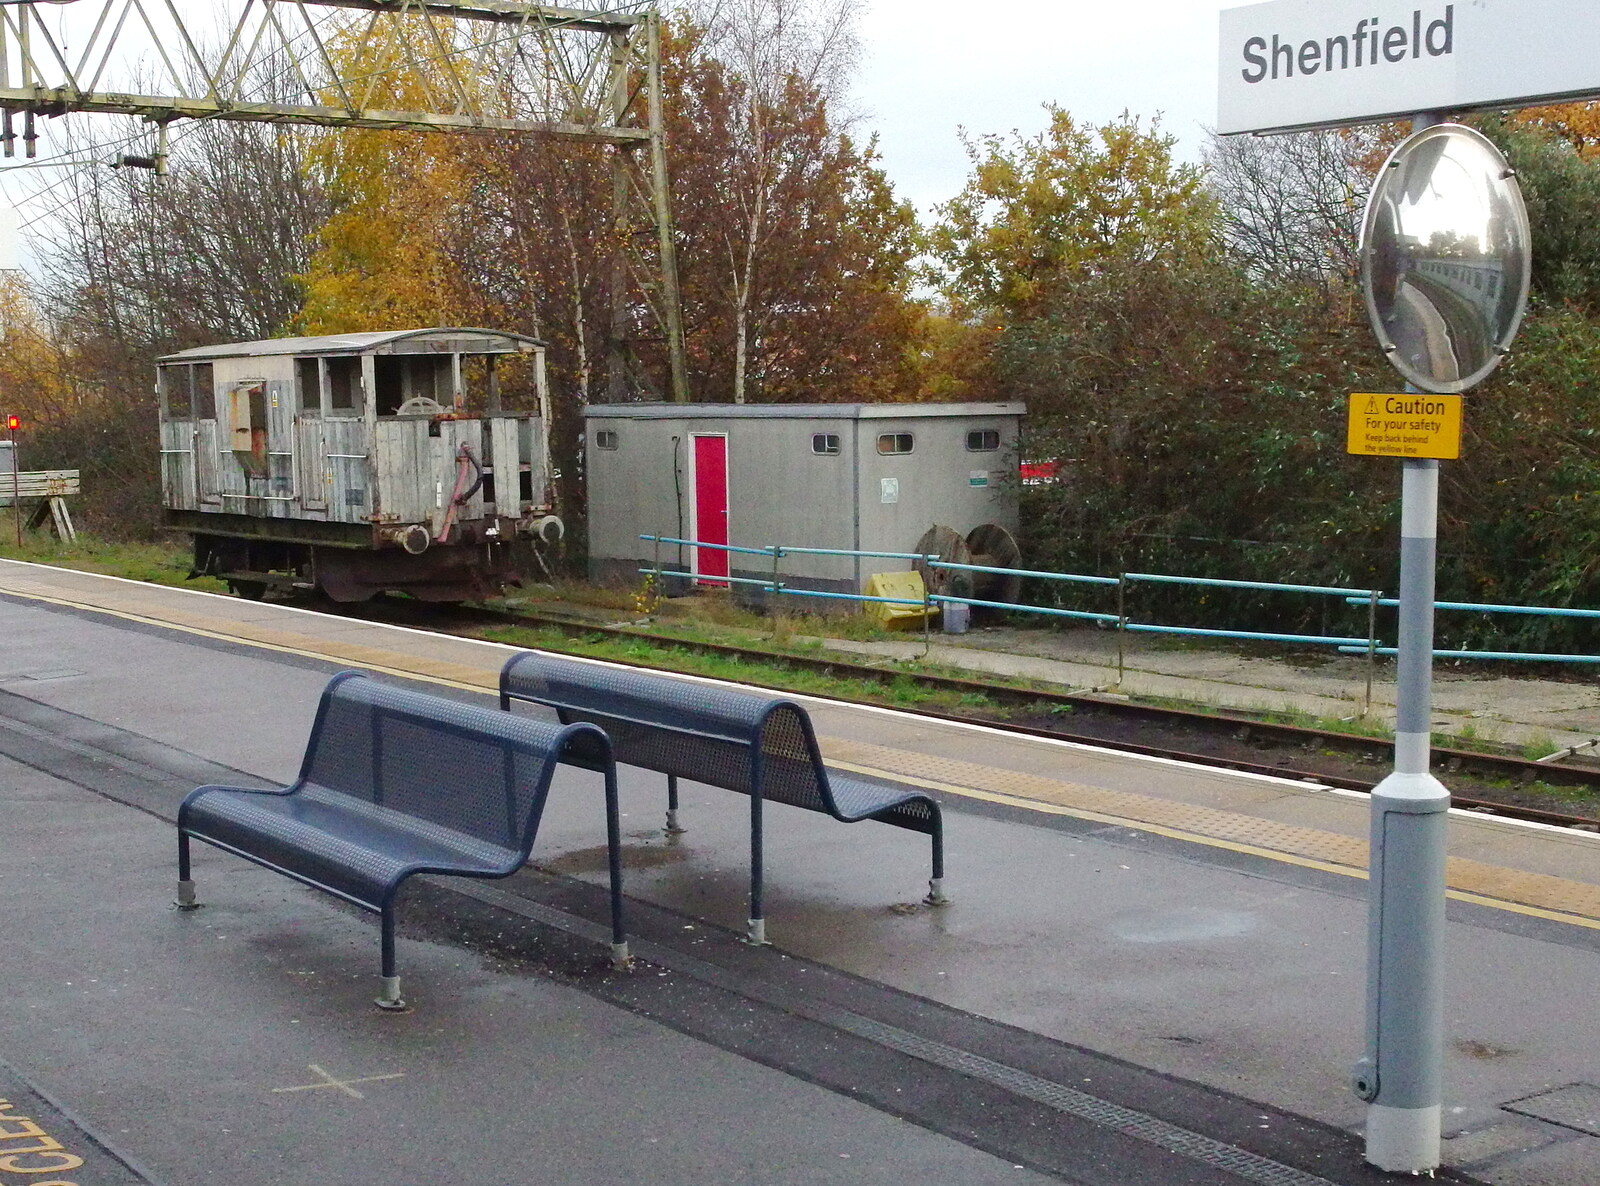 SwiftKey's Arcade Cabinet, and the Streets of Southwark, London - 5th December 2013: An ancient brake wagon at Shenfield